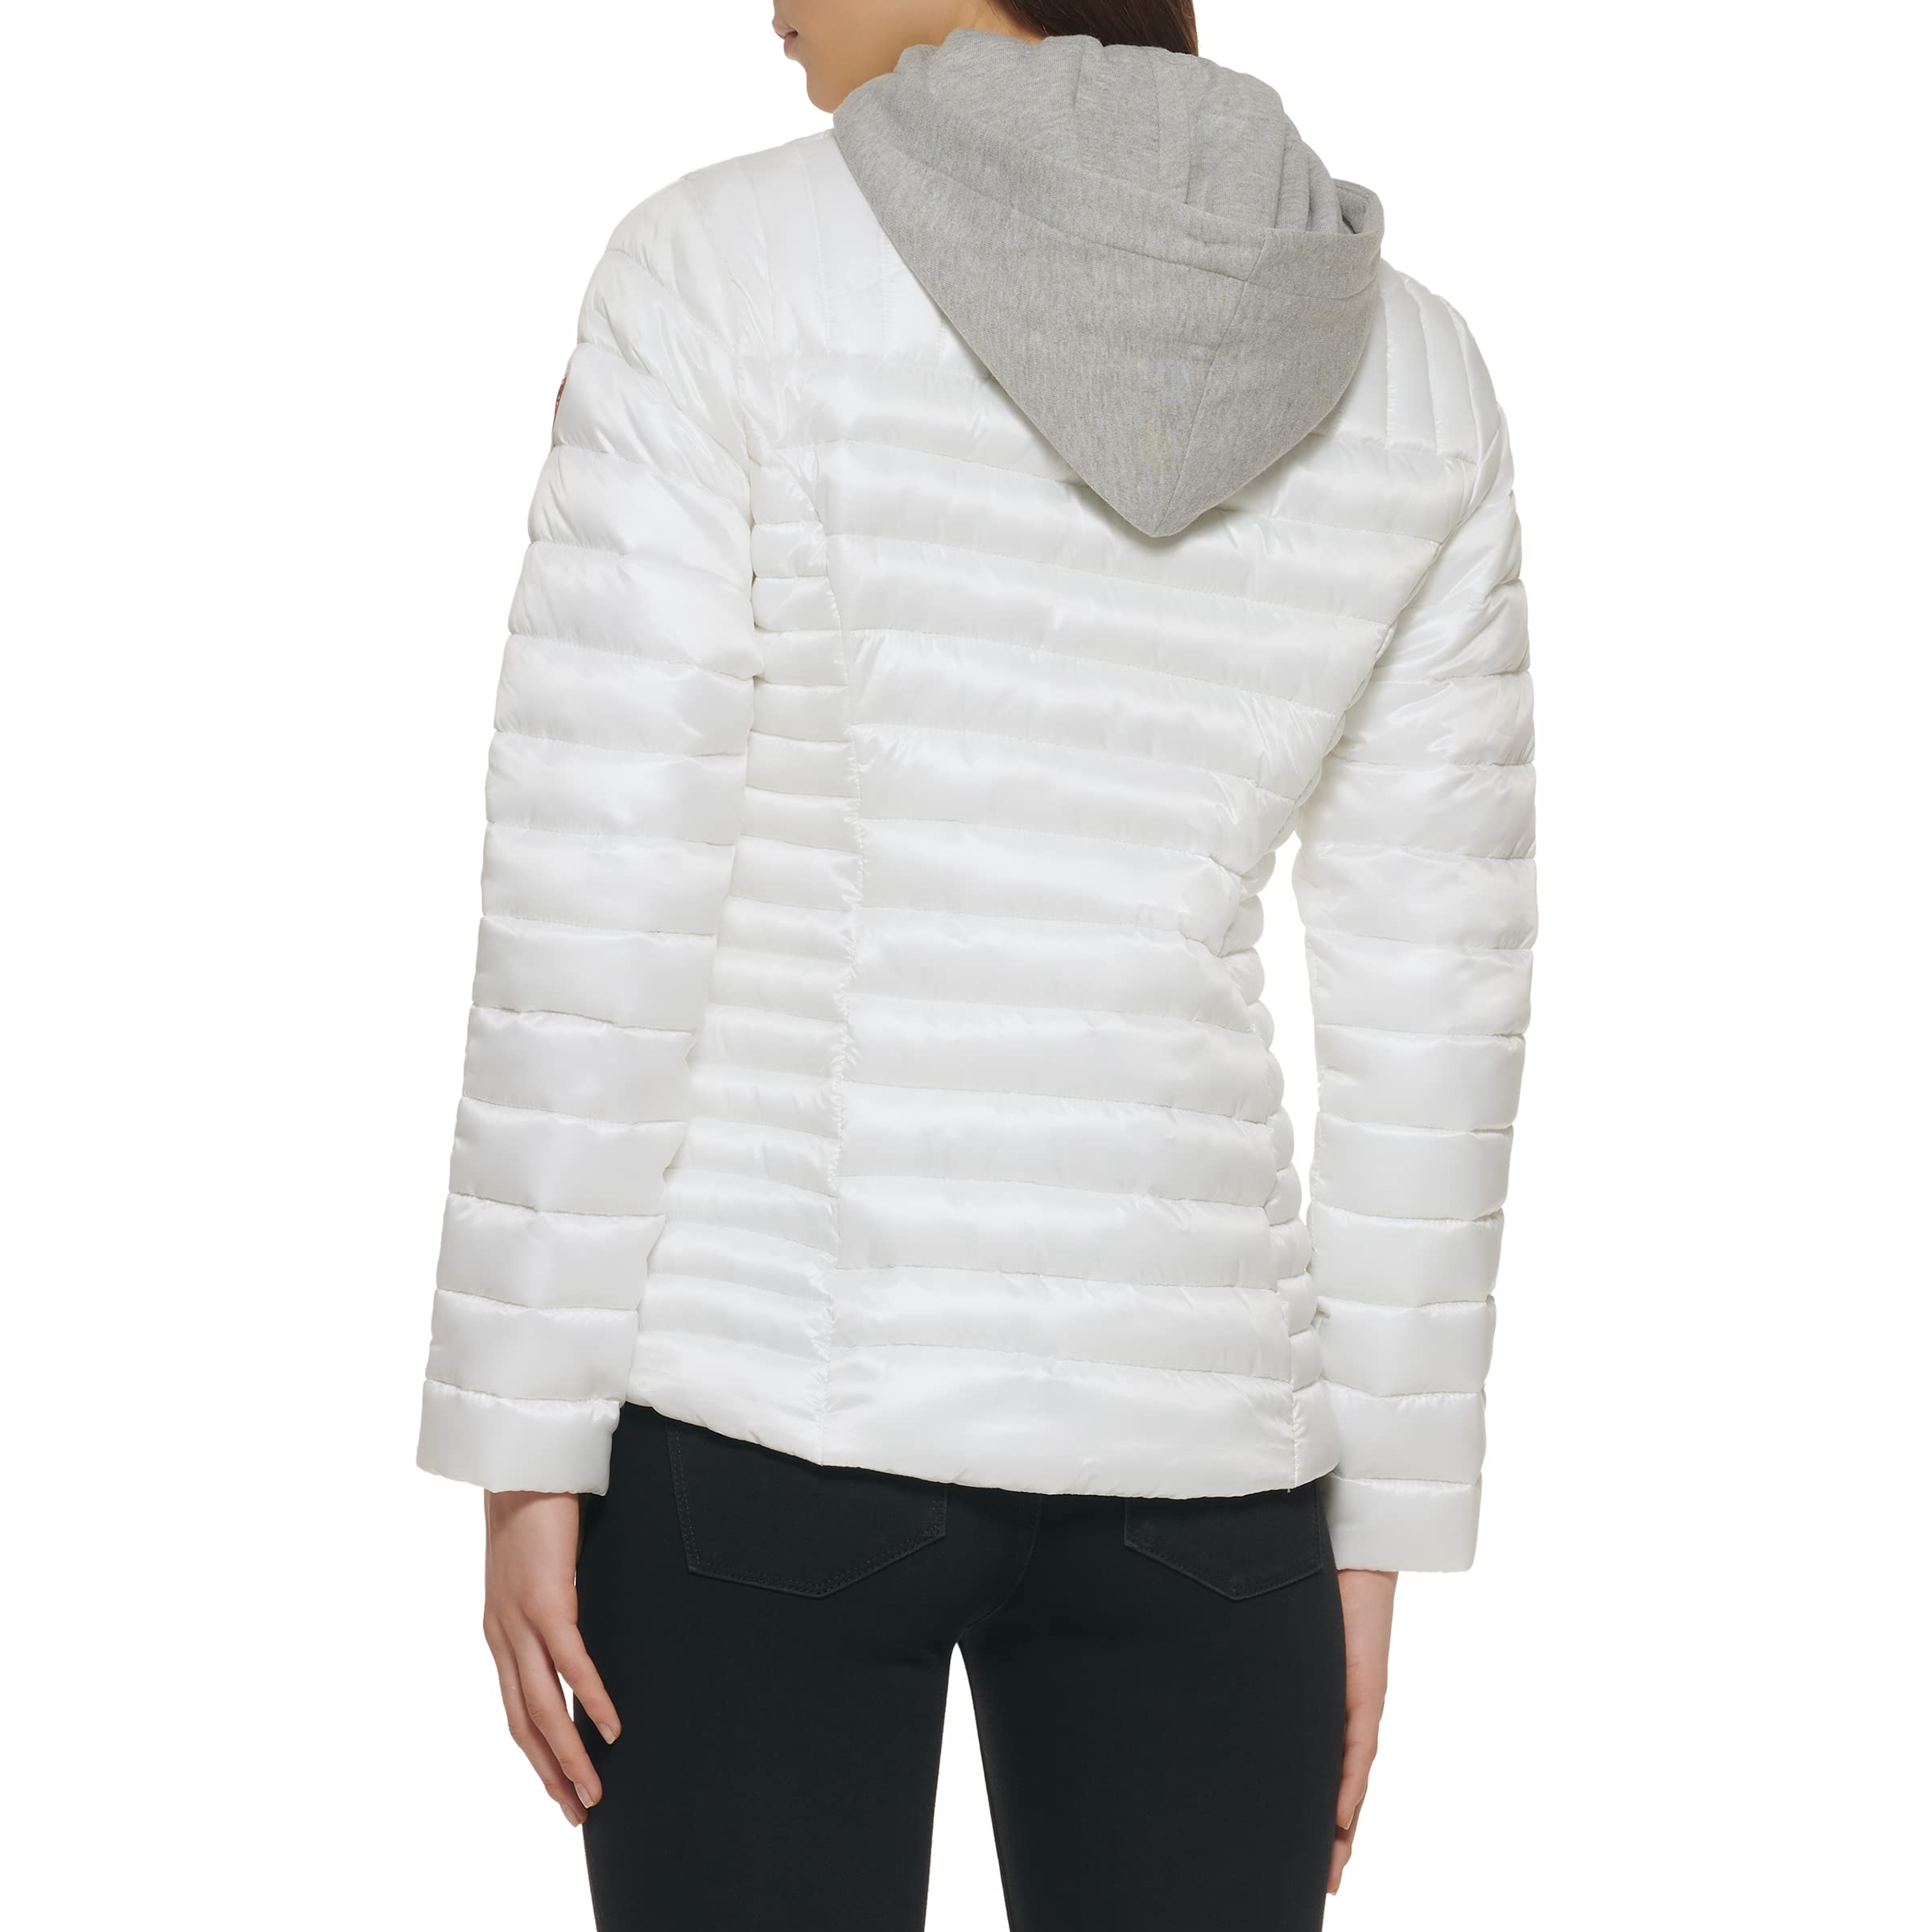 GUESS Women's Light Packable Jacket – Quilted, Transitional Puffer